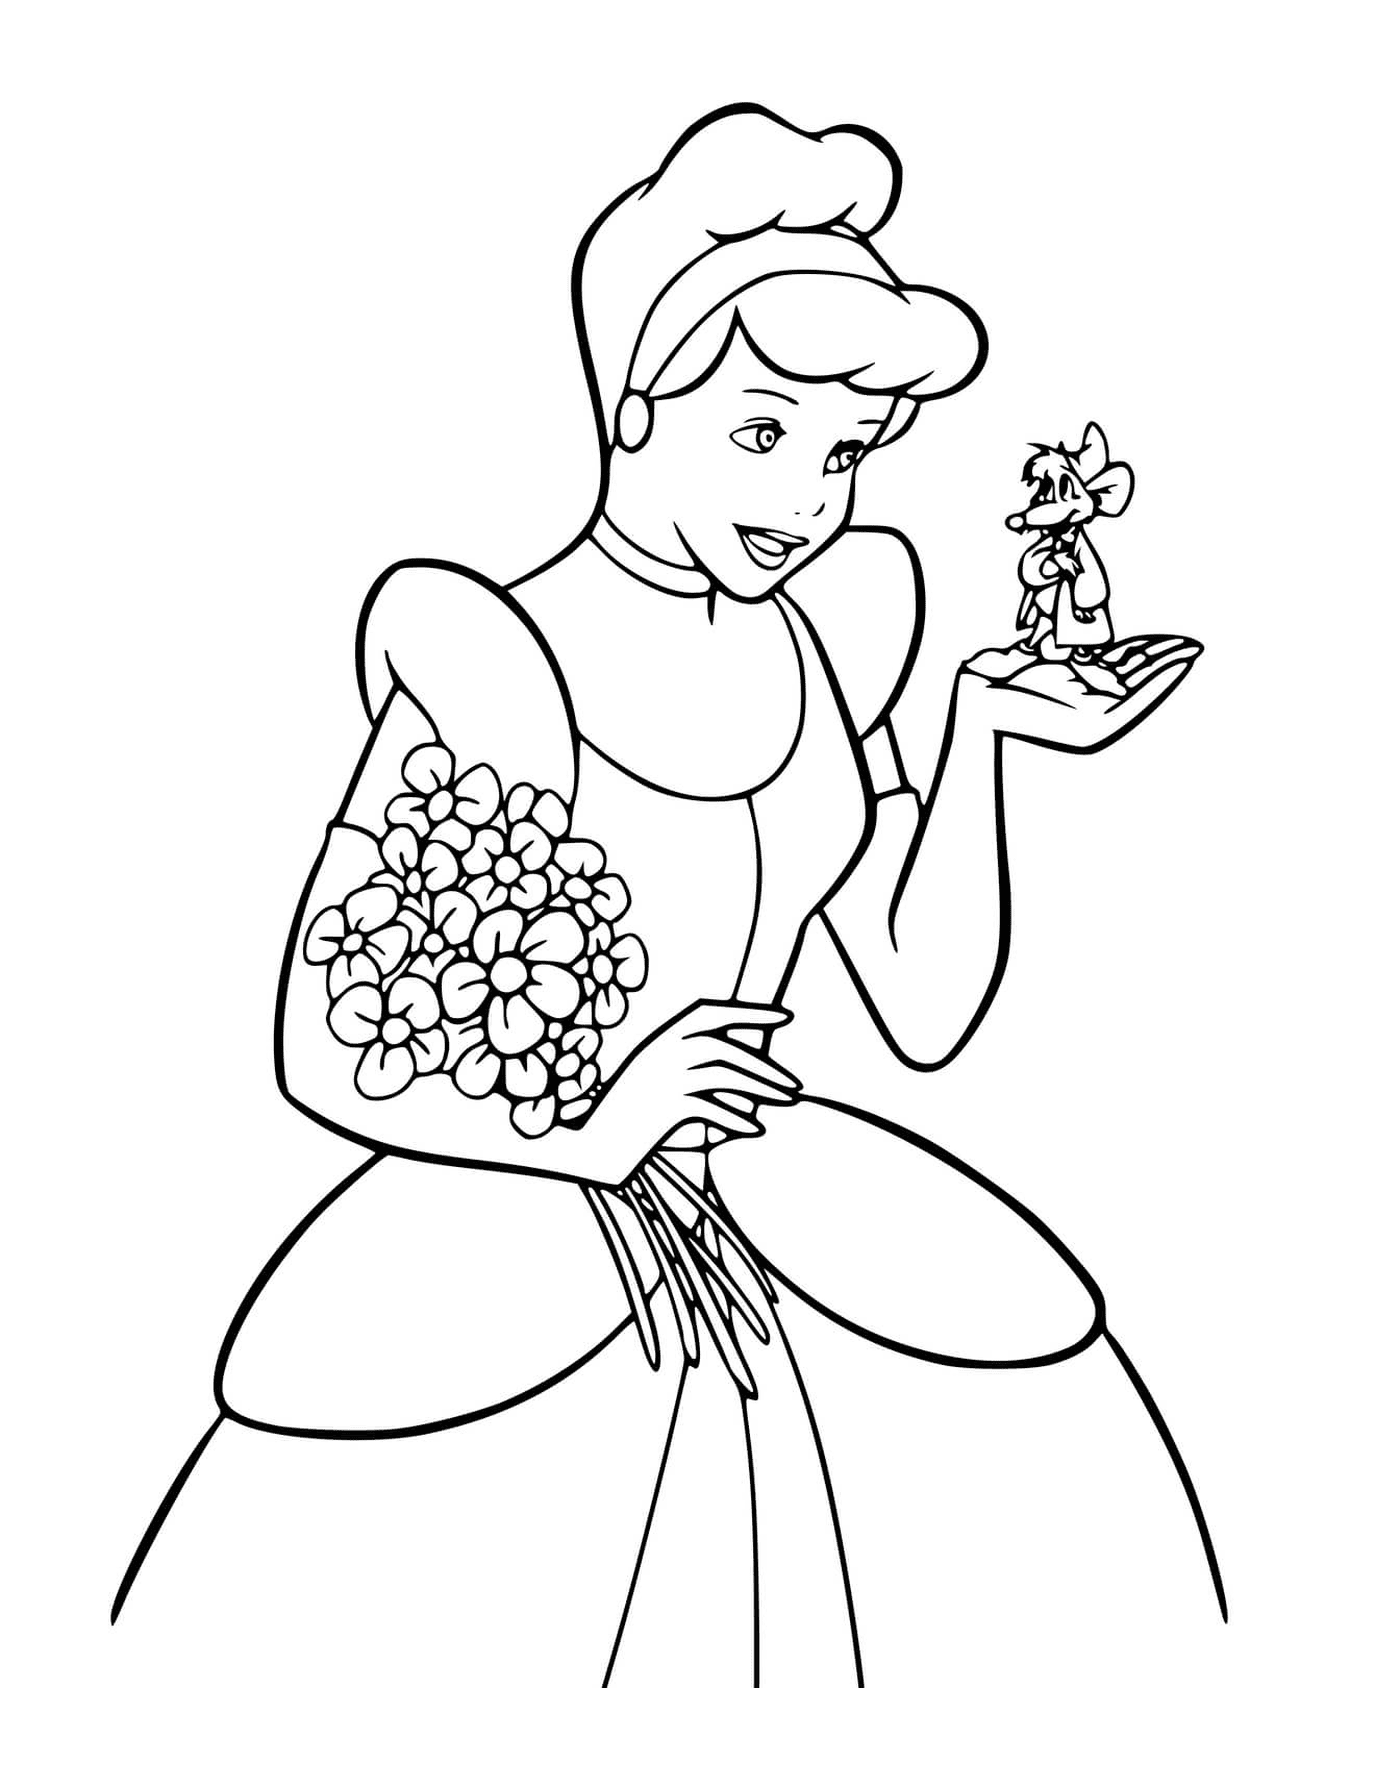  A woman holding flowers 